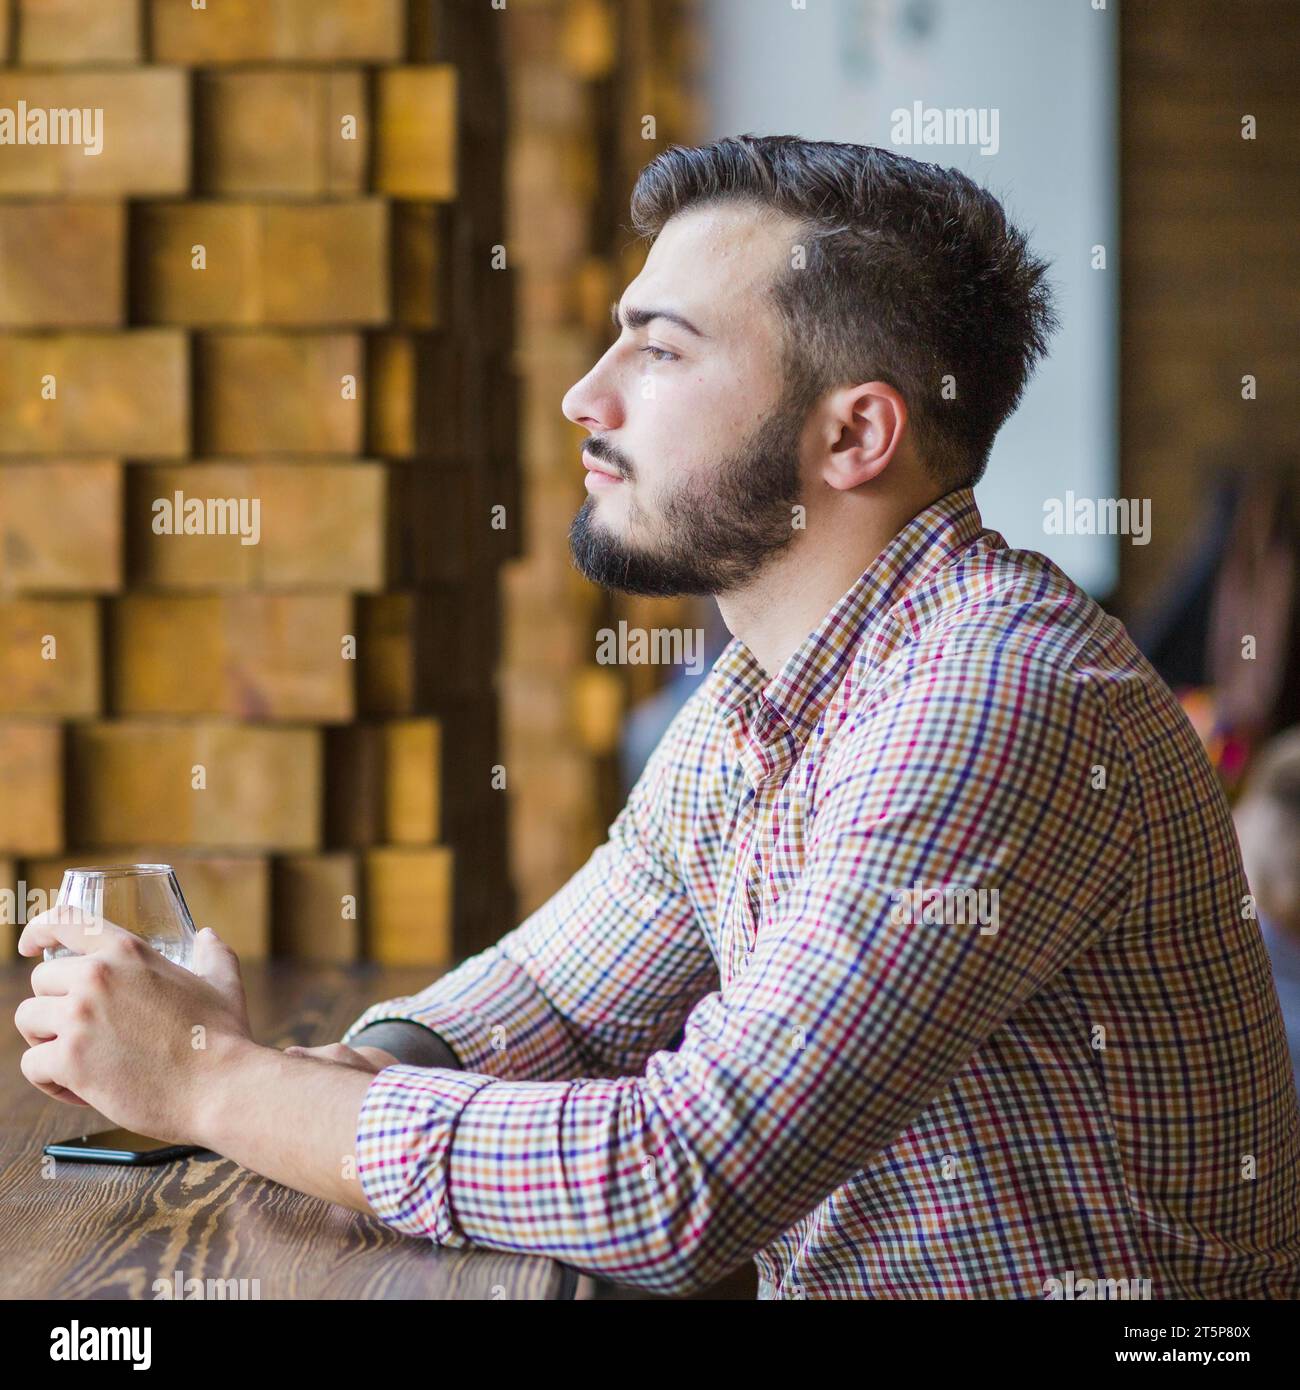 Contemplated young man holding wineglass Stock Photo